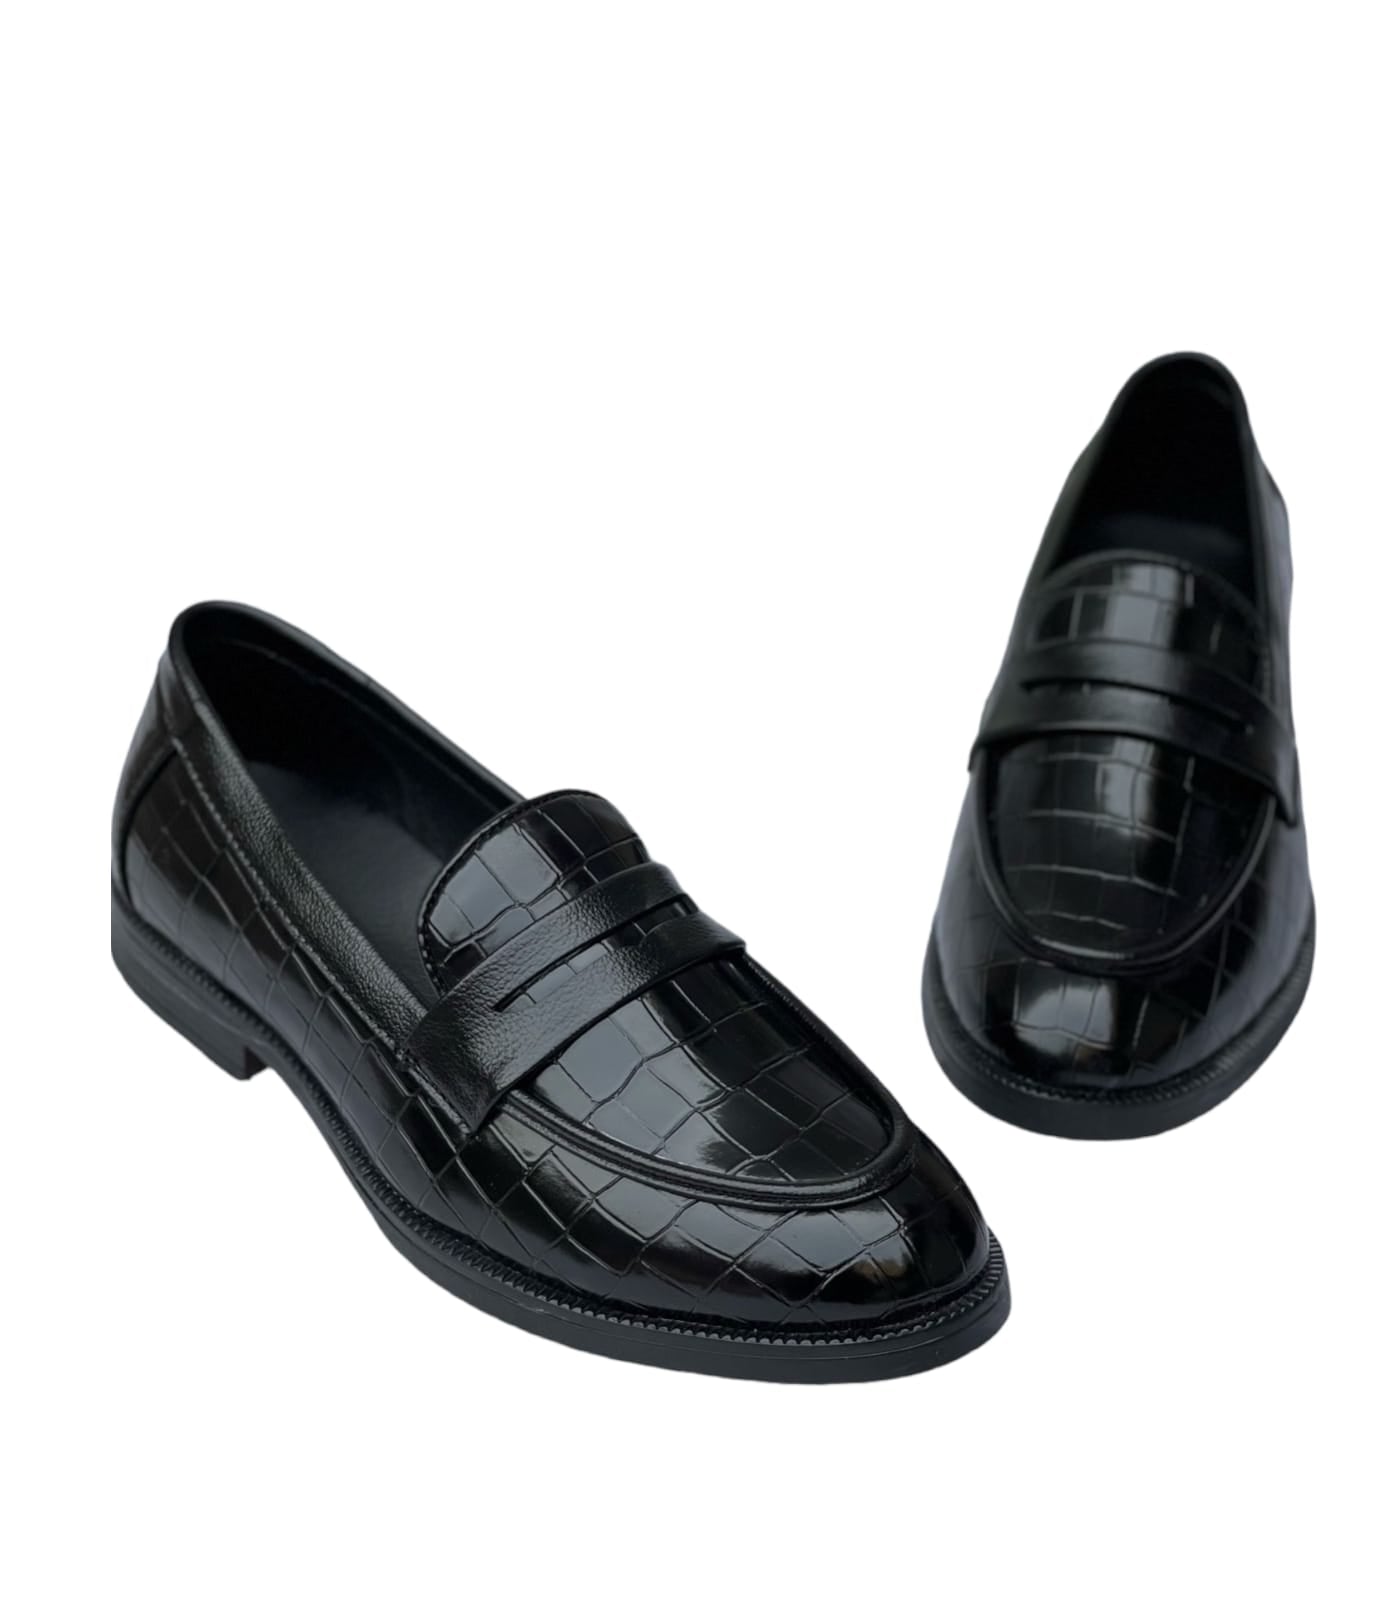 Buy New Fashion Croc Loafer Moccasin For Partywear And Casual Wear - JackMarc